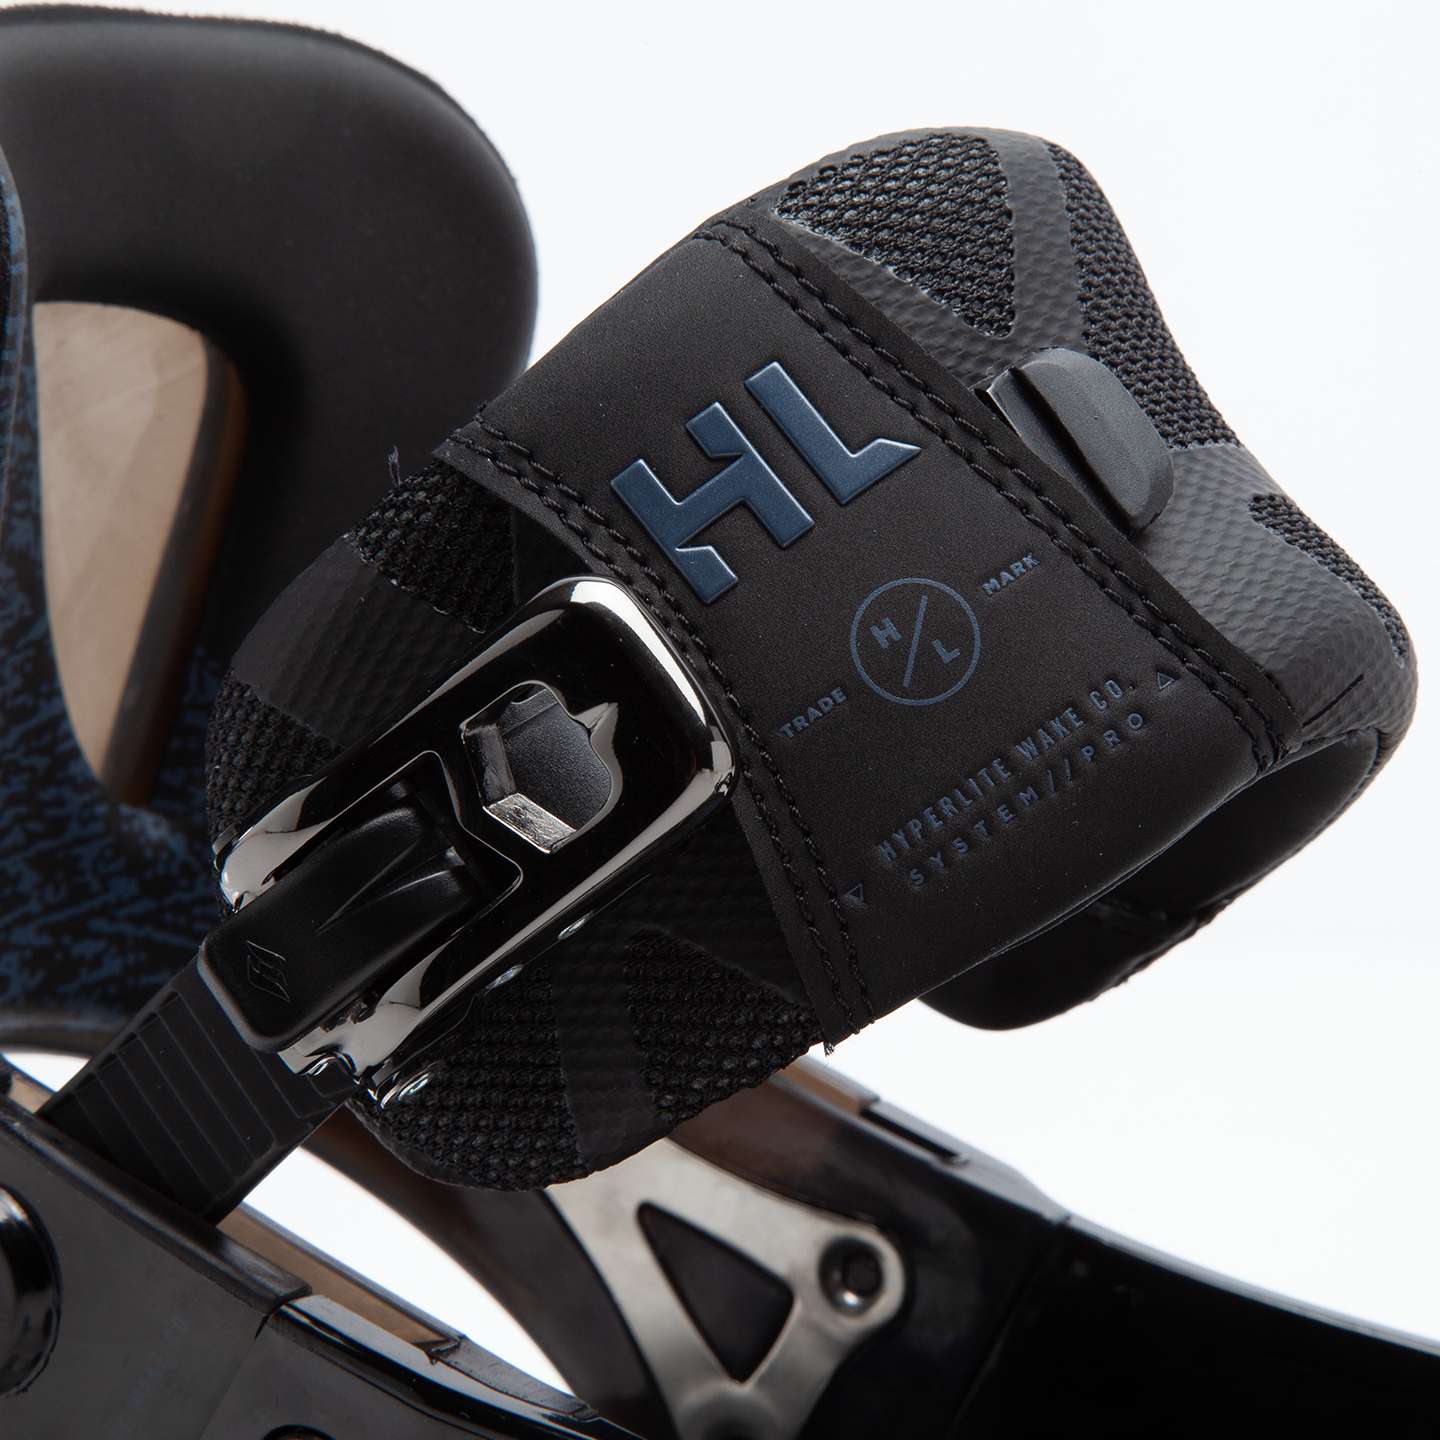 Hyperlite System Pro Binding Chassis 2021 | King of Watersports